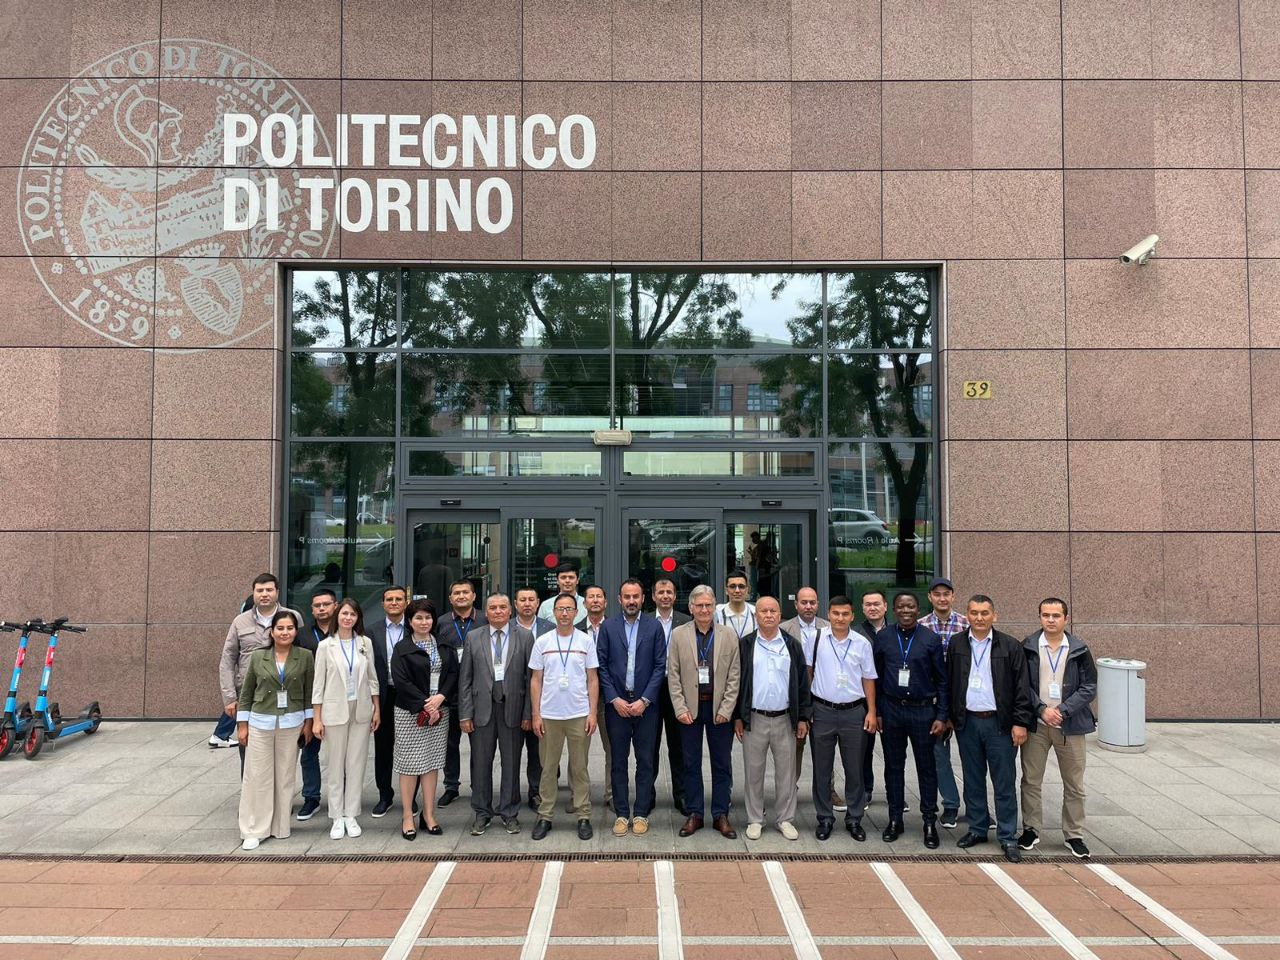 You are currently viewing The meeting of the DEBSEUz international project participants is being held at the Politecnico di Torino in Italy.